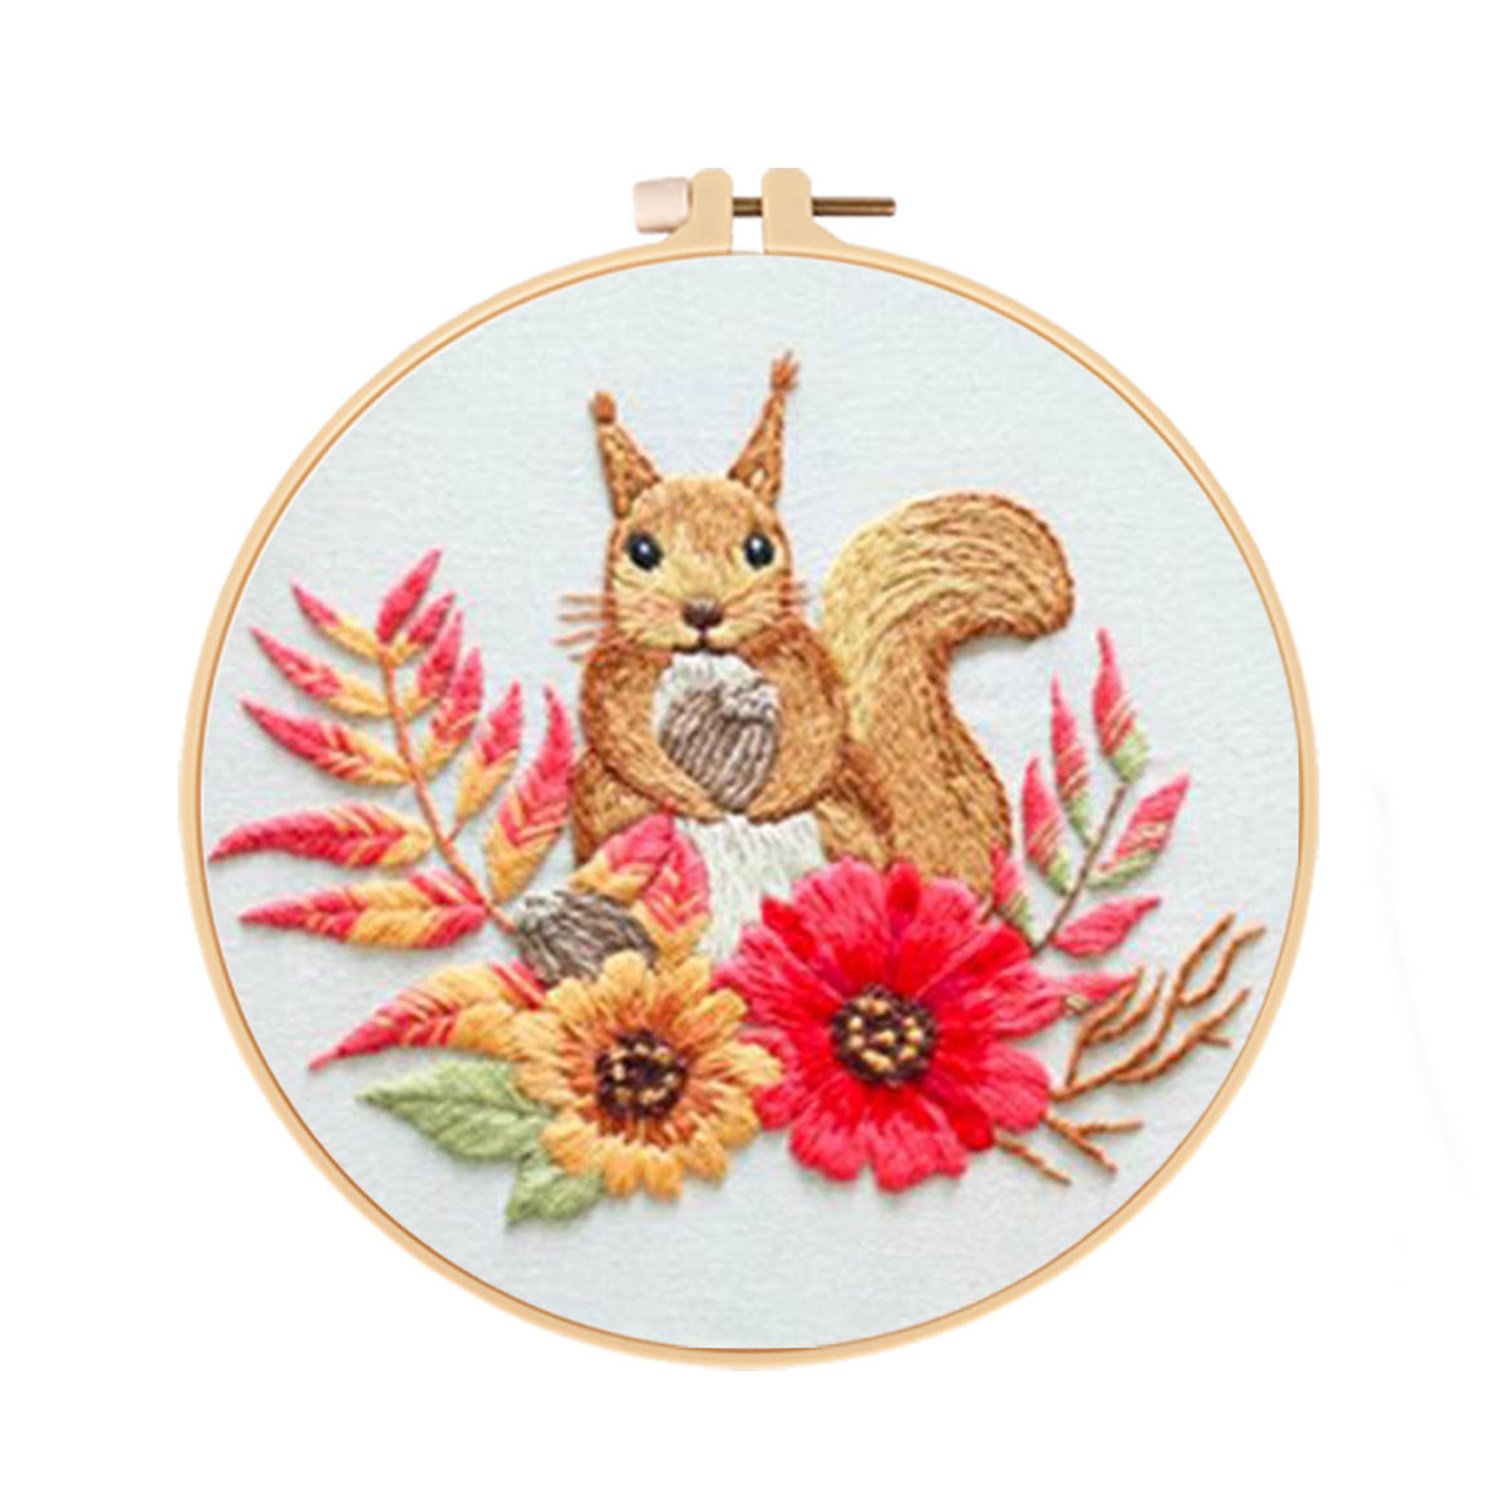 Embroidery Starter Kit Cross stitch kit for Beginners Kids - Squirrel Pattern